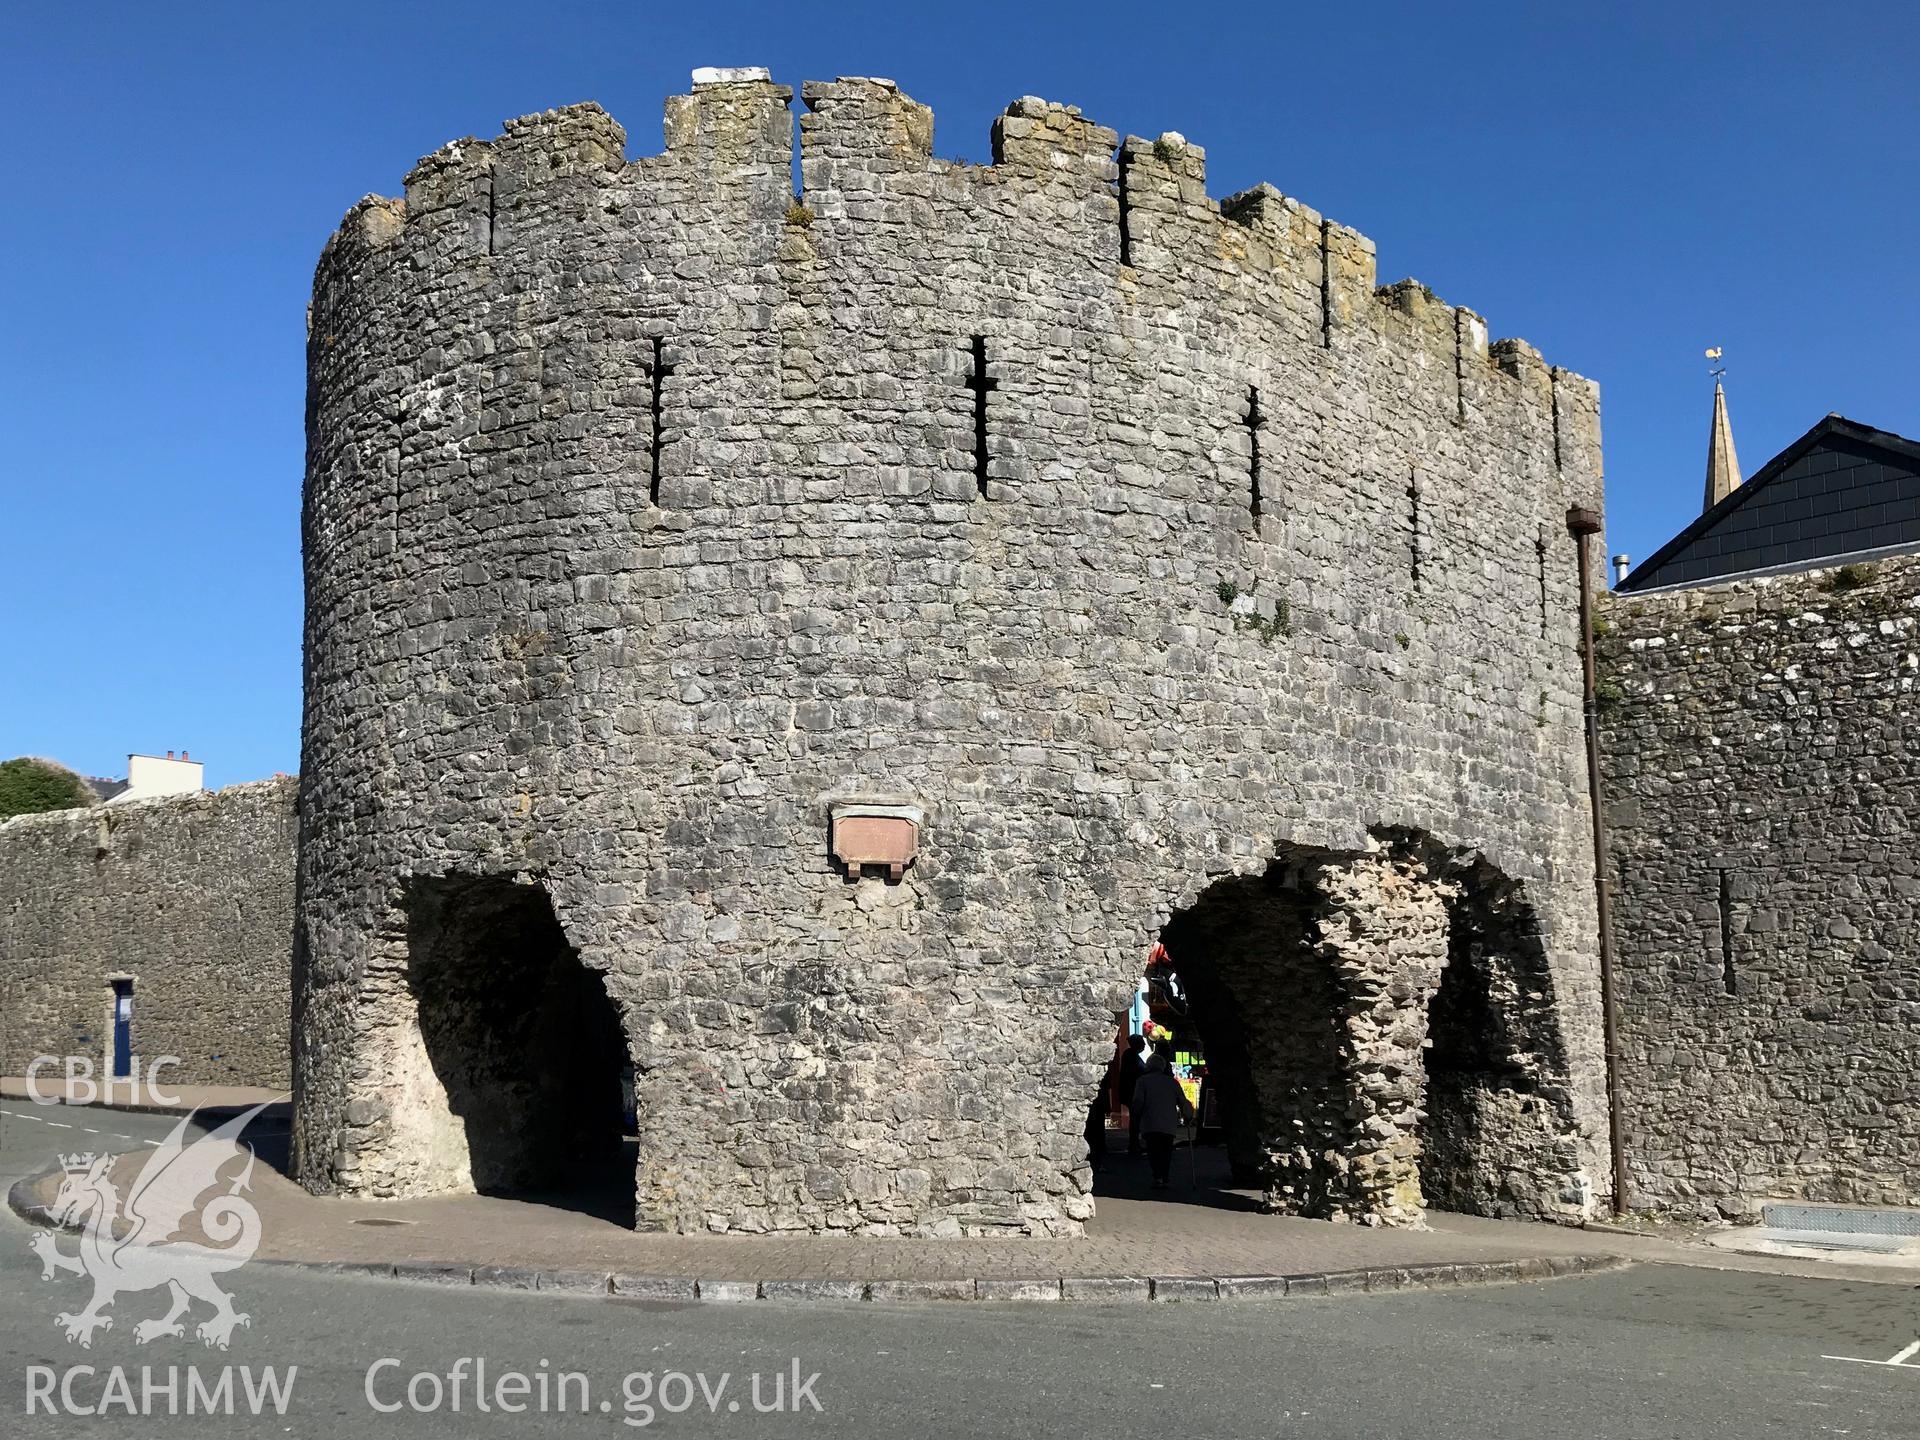 Digital colour photograph showing Tenby's town walls, taken by Paul R. Davis on 20th September 2019.